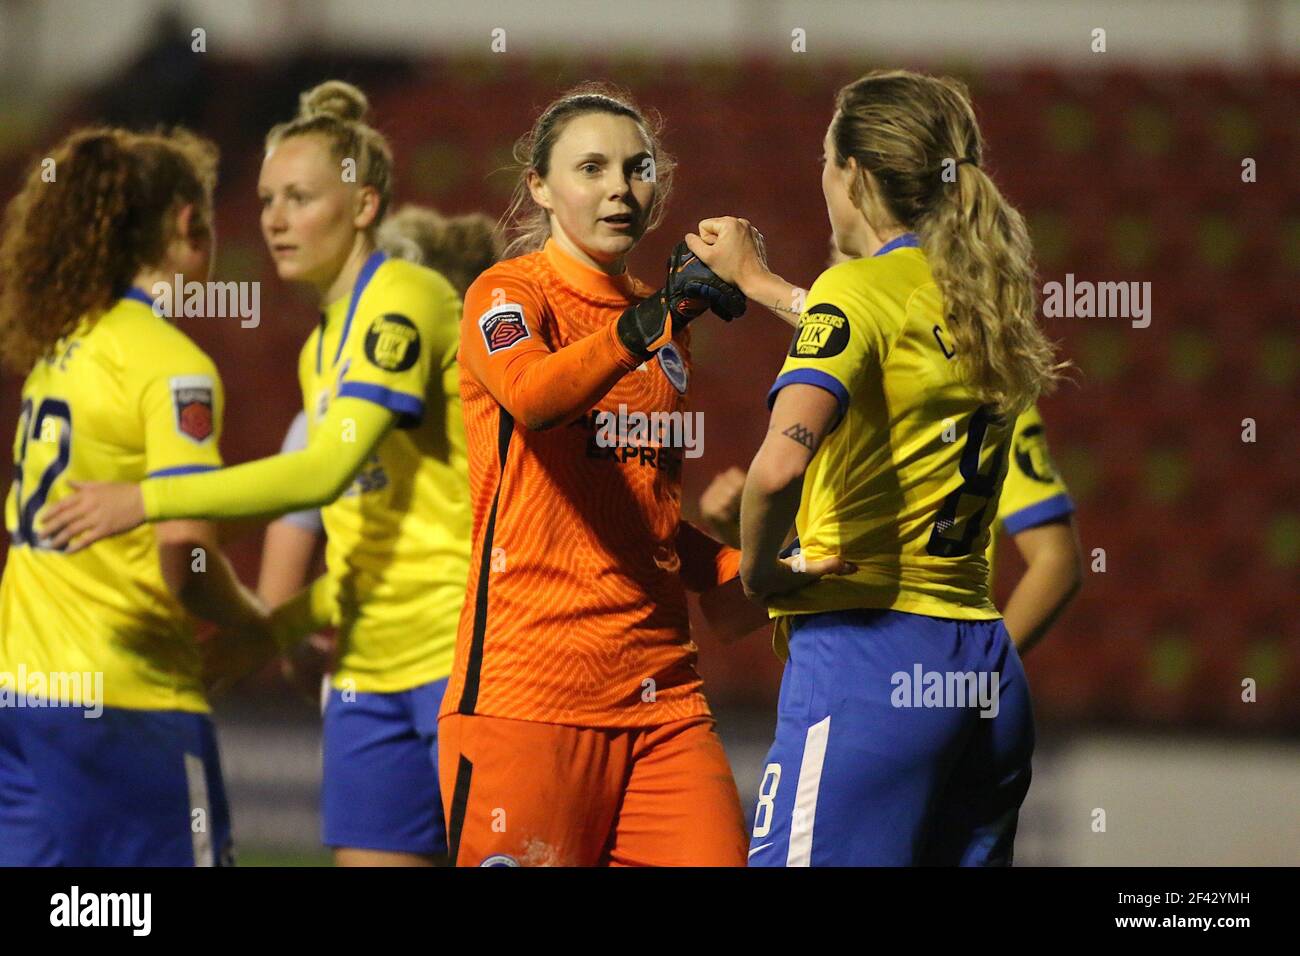 Megan Walsh (#1 Brighton & Hove Albion) and Megan Connolly (#8 Brighton & Hove Albion) after the FA Womens Super League 1 game between Aston Villa and Brighton & Hove Albion at Bescot Stadium in Walsall. Stock Photo